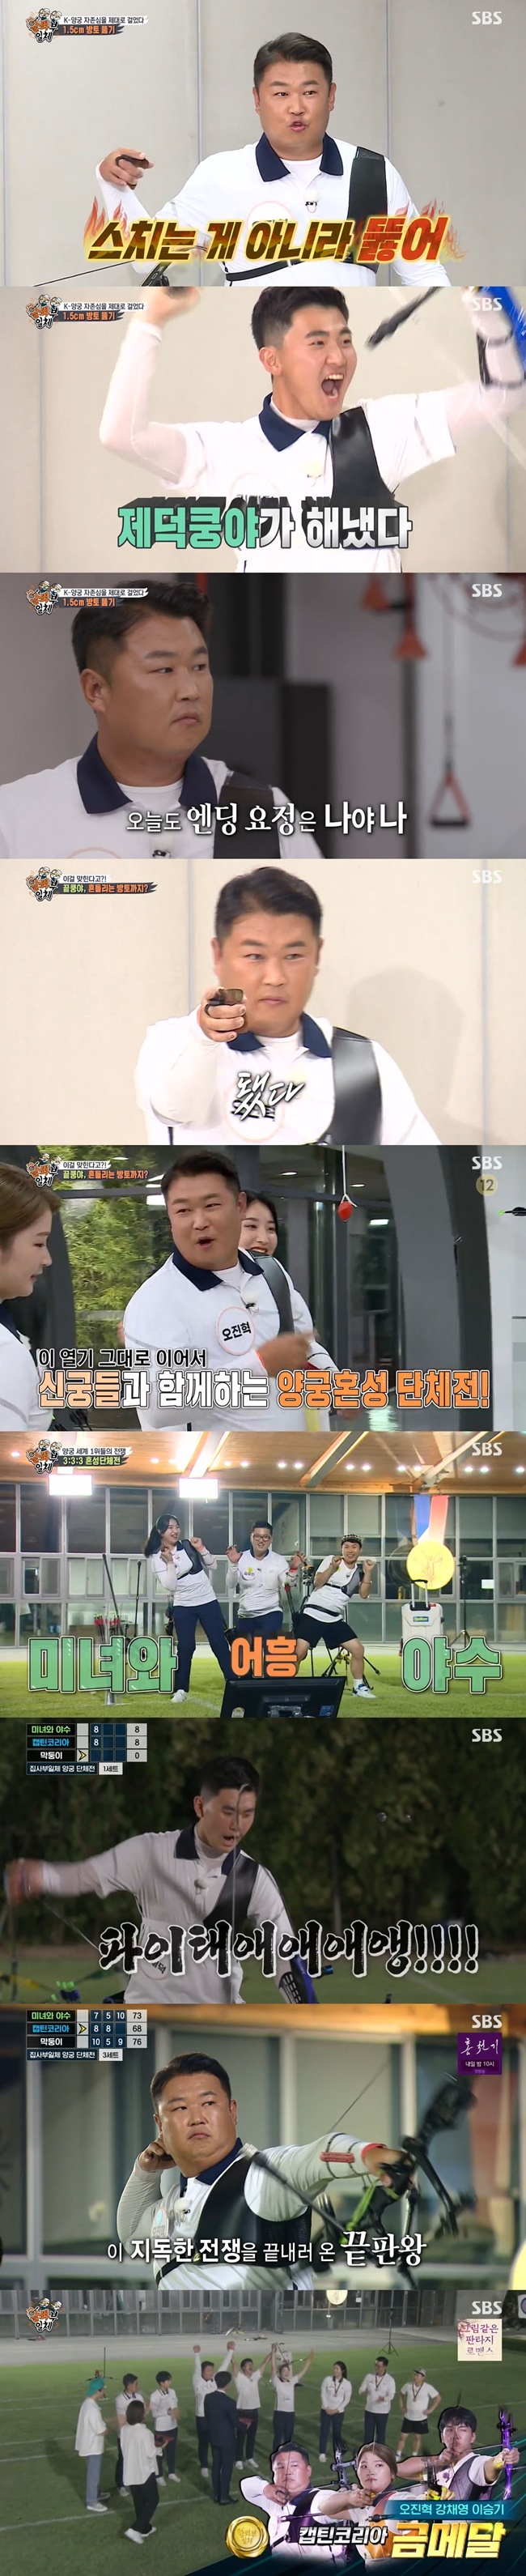 Oh Jin-Hyek showed end kung-ya Down skillsOn August 29, SBS All The Butlers featured the archery national team Oh Jin-Hyek, Kim Woo-jin, Kim je-deok, Kang Chae-young, Kang Min-hee and Anshan, who won four gold medals at the 2020 Tokyo Olympics.Oh Jin-Hyek said, I played an event game, but I walked the ring on the thread, moved it from side to side, shot the arrow, and passed the ring.I thought, I would be right if this is the timing. The game was played to match 1.5cm drop tomatoes with an arrow on the spot. The masters were divided into OB and YB, respectively.OB Kim Woo-jin, who was the first runner, crossed by a car, and Oh Jin-Hyek said, Do not brush, but pierce.YB Anshan, who had bowed in two weeks, also failed; second runner OB Kang Chae-young also brushed a bell tomatoes, taking the OB team two-scure.YB Kang Min-hee failed, unfortunately, with a thread; YB Kim je-deok and OB Oh Jin-Hyek succeeded side by side, and OB, who scored two strokes, won the final.In addition, a bell tomatoes were shaken by a game in the last minute.Oh Jin-Hyek, who was recommended by the masters, was shocked by a 1.5cm drop tomatoes that shook from side to side at 20m in just one shot.Oh Jin-Hyek showed off his end kung-ya Down side by shouting his buzzword end for the camera.Finally, the master and his disciples were divided into three teams, each of which was a mixed group exhibition.In the commentary, SBS Jo Jeong-sik announcer and Kim je-deok are attending Gyeongbuk Ilgo archery coach Hwang Hyo-jin.Beauty and Beast Kang Min-hee, who became the first runners-up in the first set, broke the start with eight points on the handicap that they were not their bow.Captain America: Civil War Korea Kang Chae-young also shot eight points; the youngest Kim je-deok led with 10 points from the first.Jo Jeong-sik, now a fight of how bad the disciples are, inflicted fact violence; in the first set, the beauty, Beast and the youngest led.In the second set, Captain America: Civil War Korea Lee Seung-gi scored nine points in the first set and led the team to the lead.The youngest Yoo-bin shot eight points despite Lee Seung-gis obstruction.The last runner-up, Beauty and Beast Oh Jin-Hyek, shot eight points, with Captain America: Civil War Korea and the youngest ones taking the lead in the second set.In the third set, Beauty and Beast Kang Min-hee scored seven points, and Captain America: Civil War Korea Kang Chae-young scored eight.The youngest Kim je-deok showed off his hip dance to the 10-point Wikimikki Picky Picky after scoring 10 points.Unlike the aspiration of I will shoot 10 points, the beauty and Beast two-wayer embarrassed the masters with only five points, and the leading youngest, Yoo Soo-bin, also started to shake with five points.